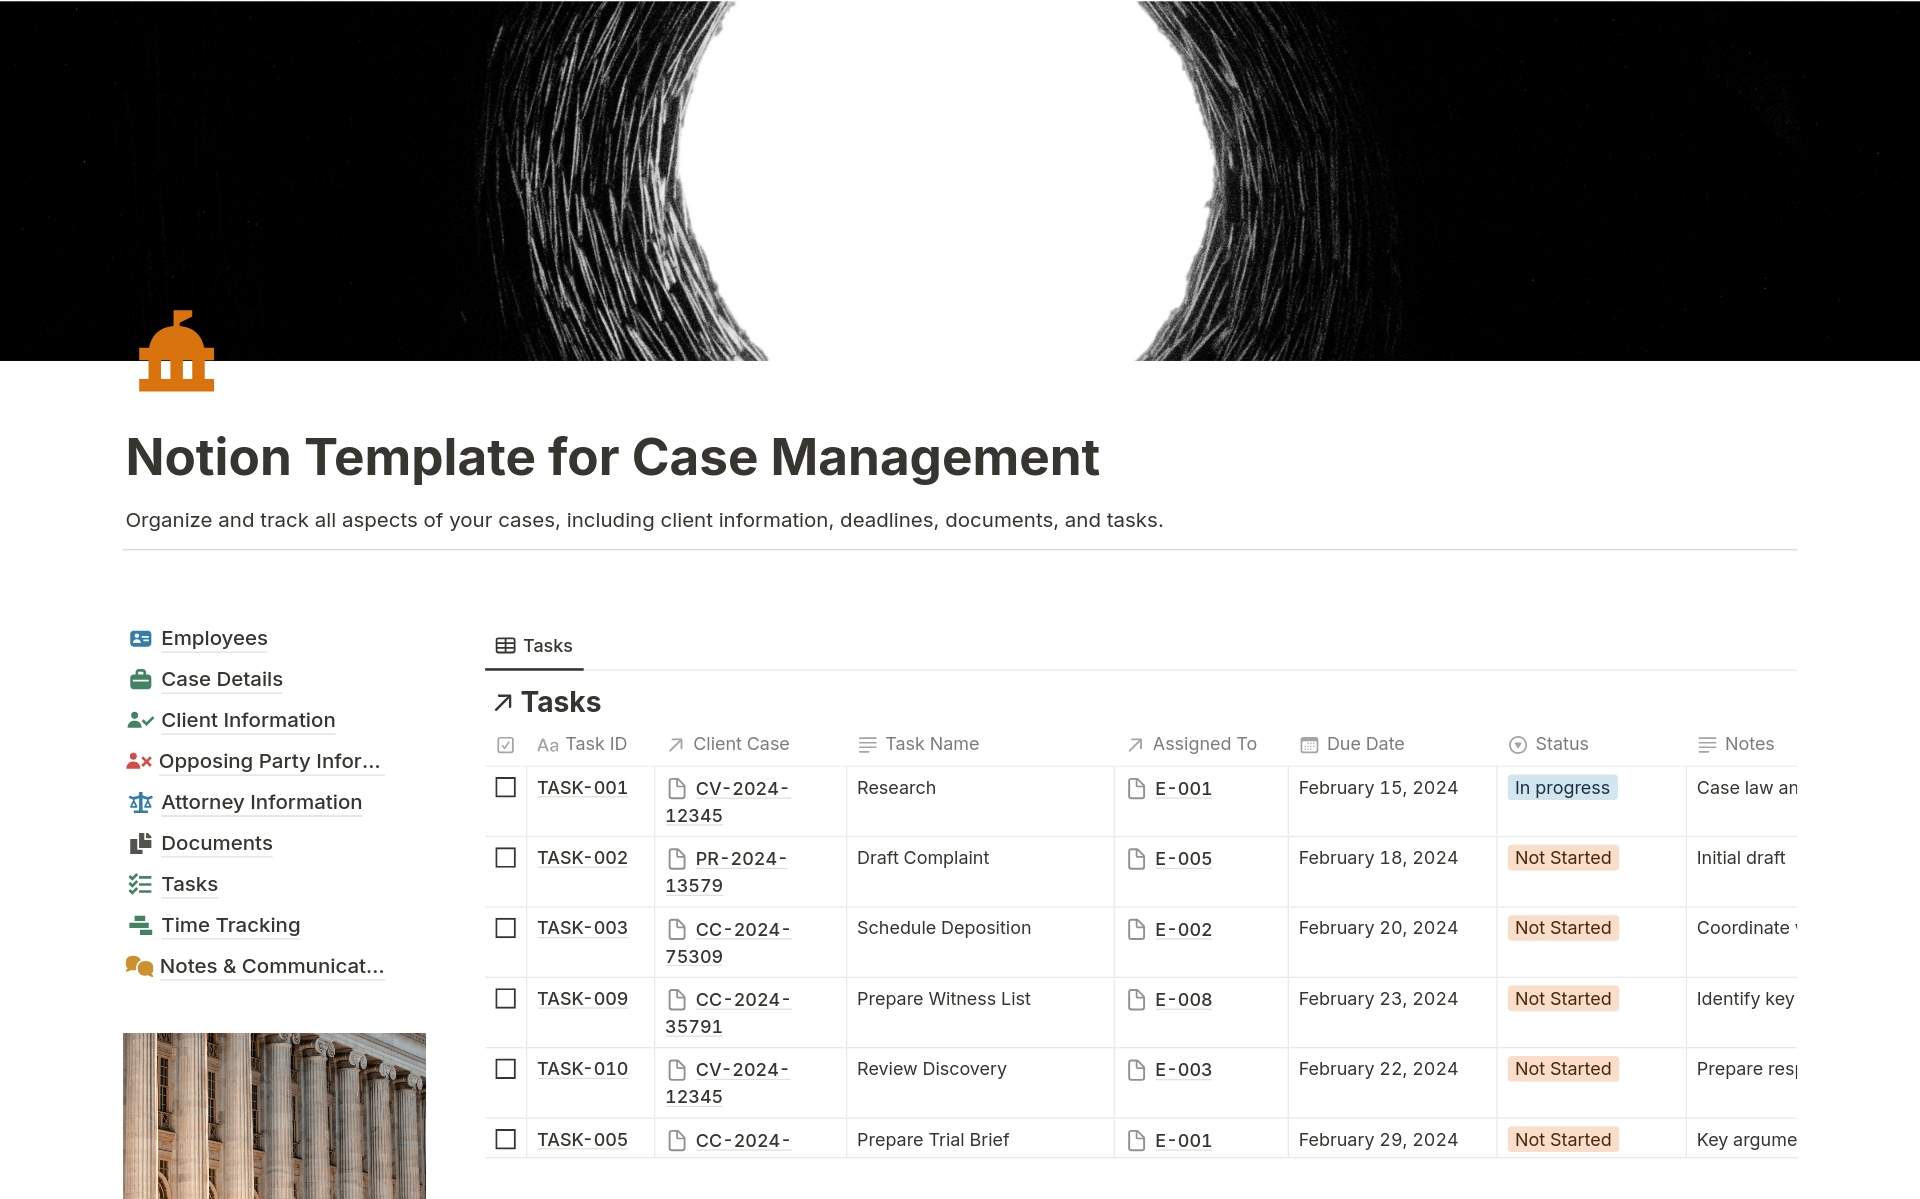 Streamline your legal workflows with our customizable Notion Template for Case Management. Effortlessly organize case details, track tasks, and manage documents in one centralized platform. Simplify collaboration and enhance productivity for your legal team today.